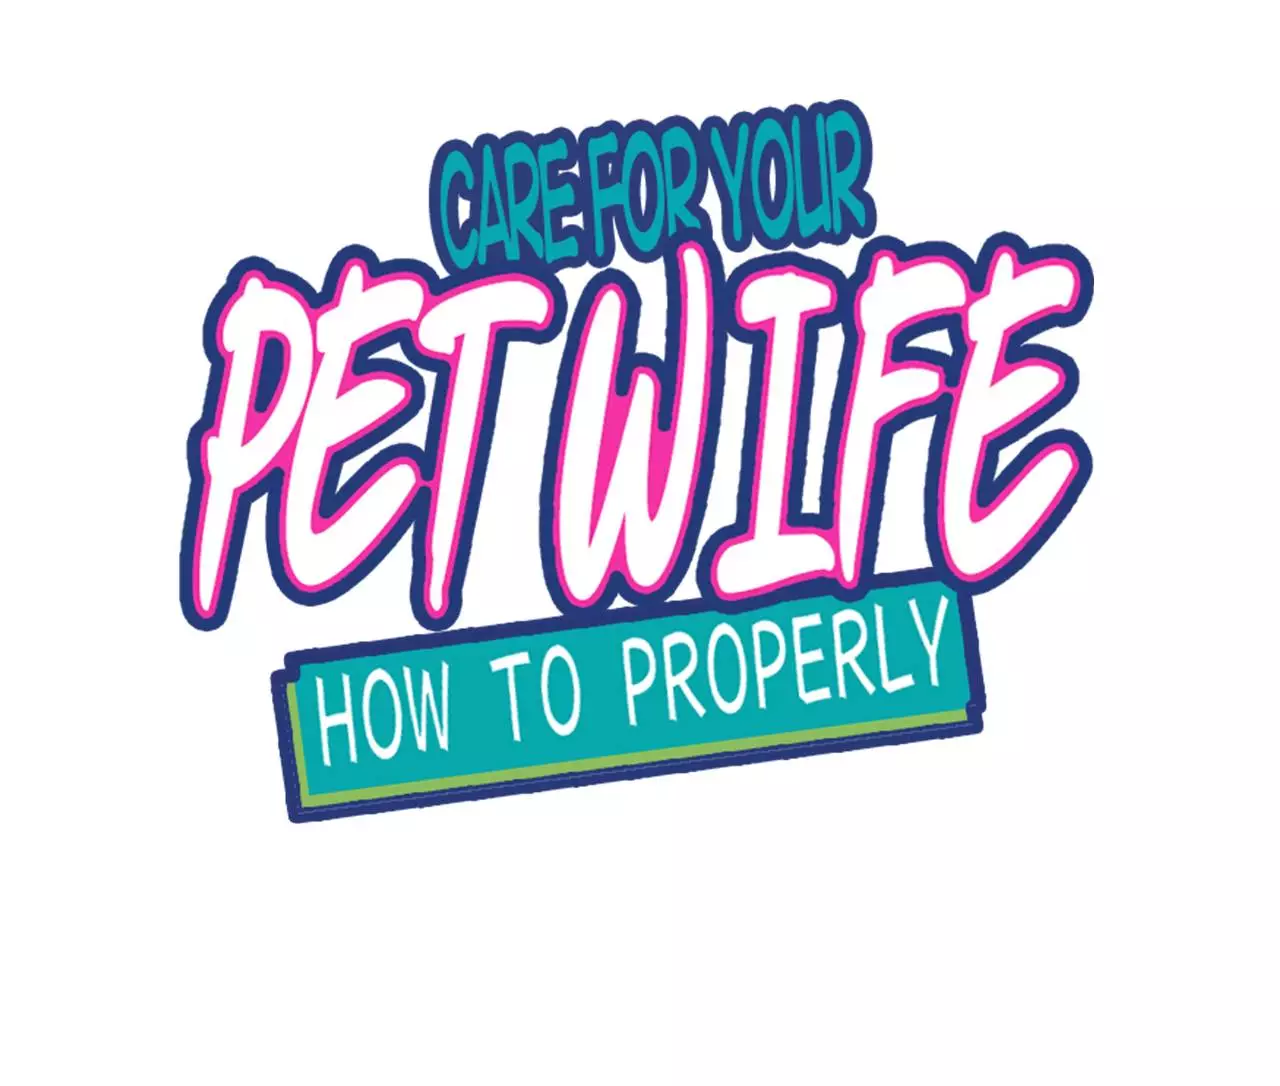 How To Properly Care For Your Pet Wife - 19 page 1-12bd1bb5